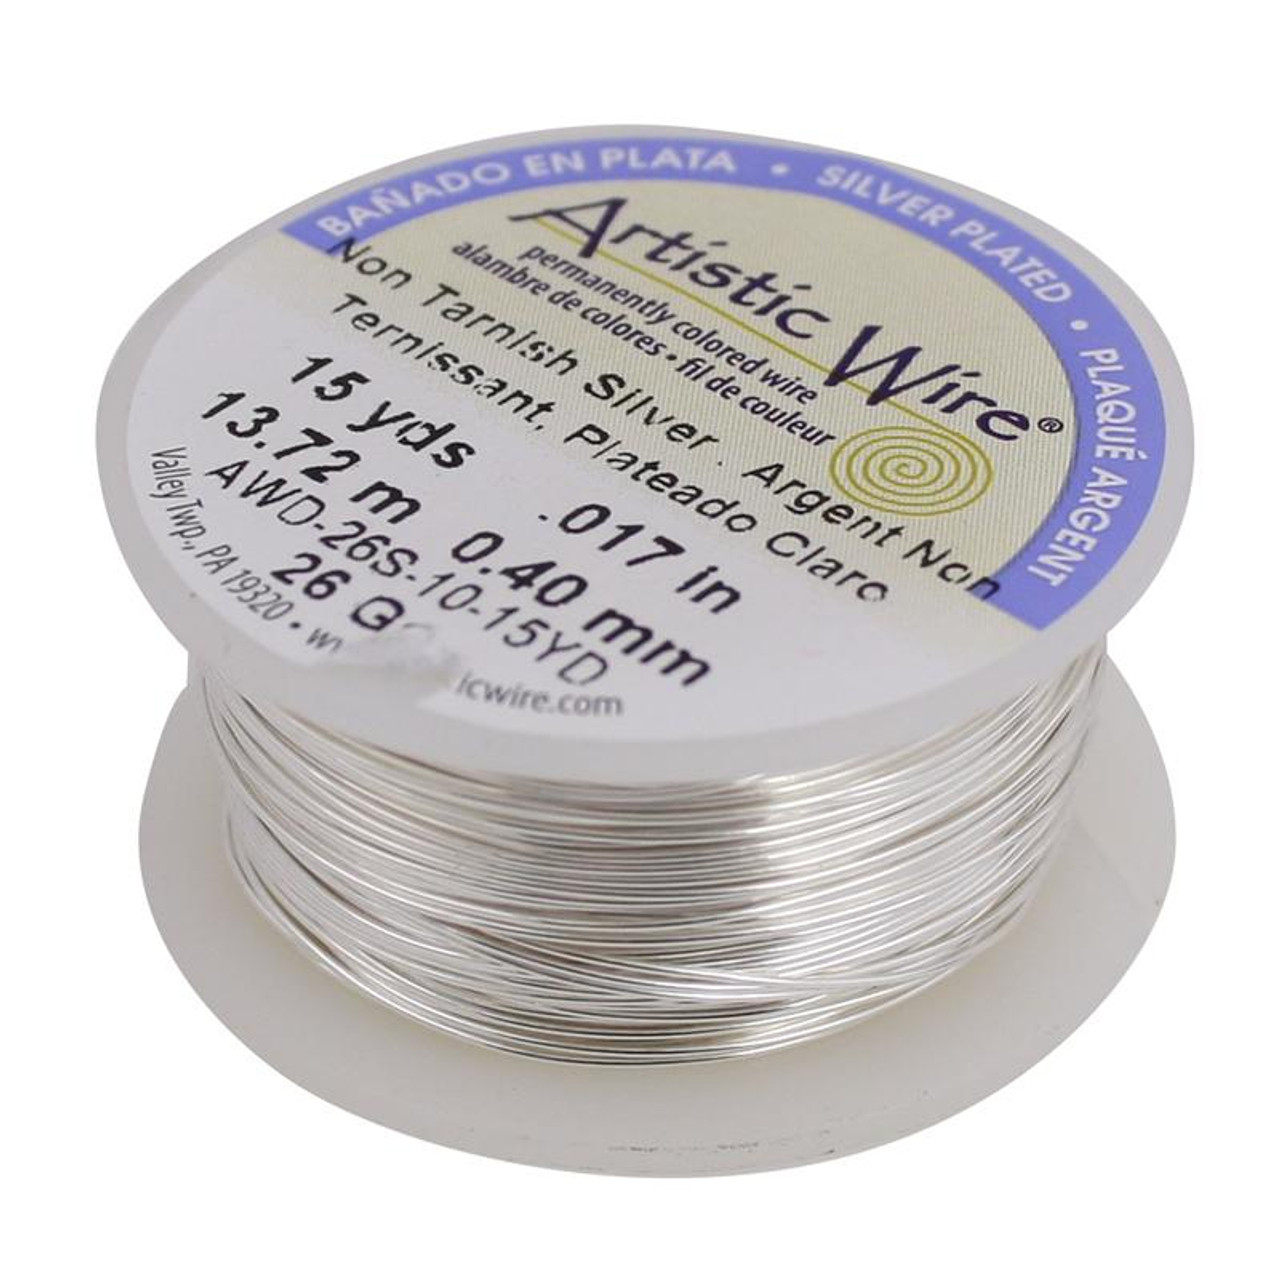 ParaWire Rose Gold-Finished Silver-Plated Copper Craft Wire 18-Gauge  4-Yards with Clear Protective Coating